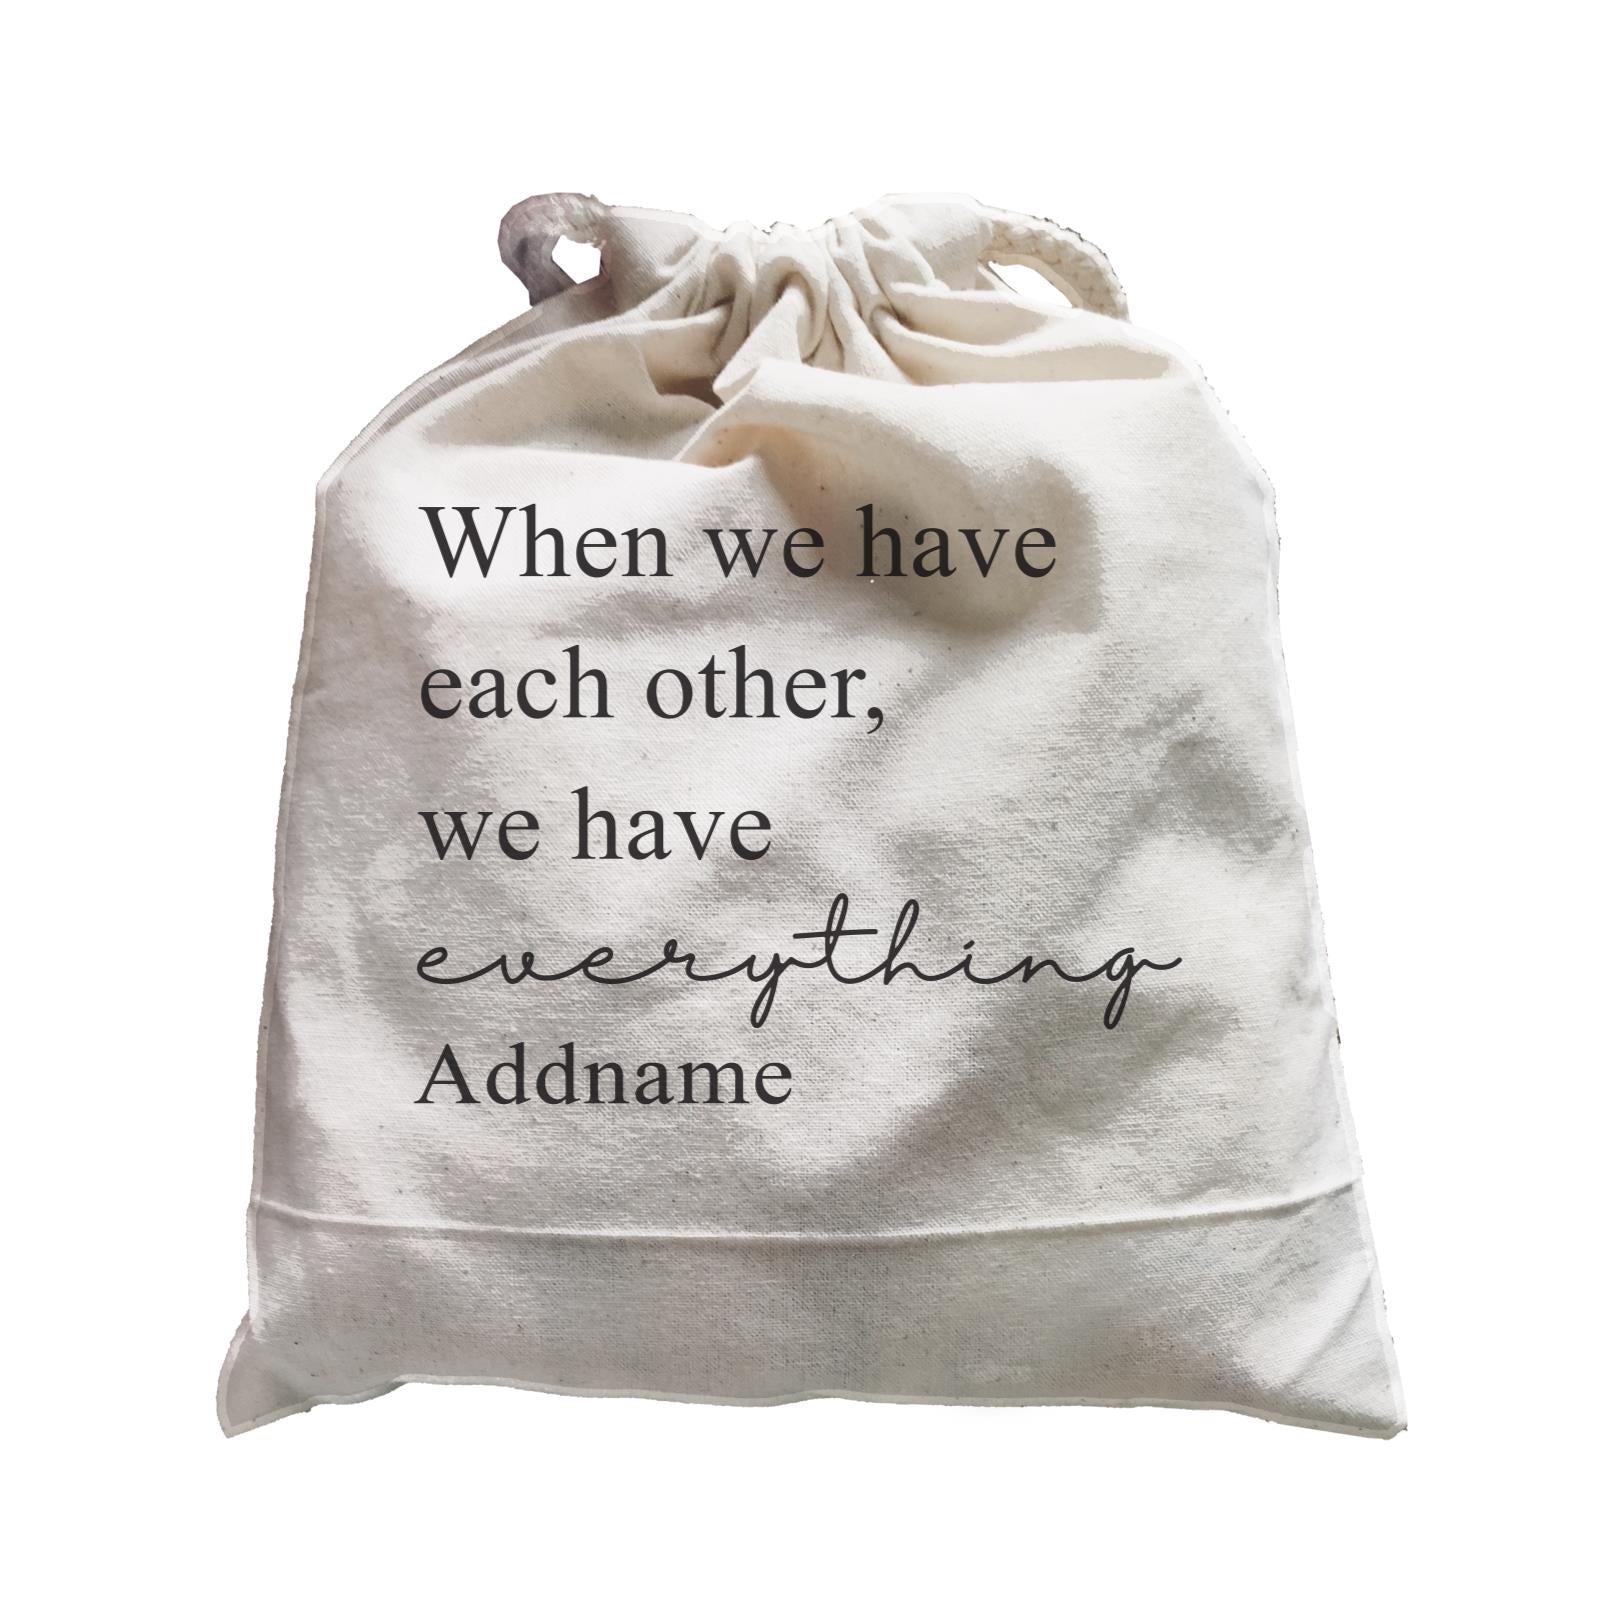 Family Is Everythings Quotes When We Have Each Other,We Have Everthing Addname Satchel